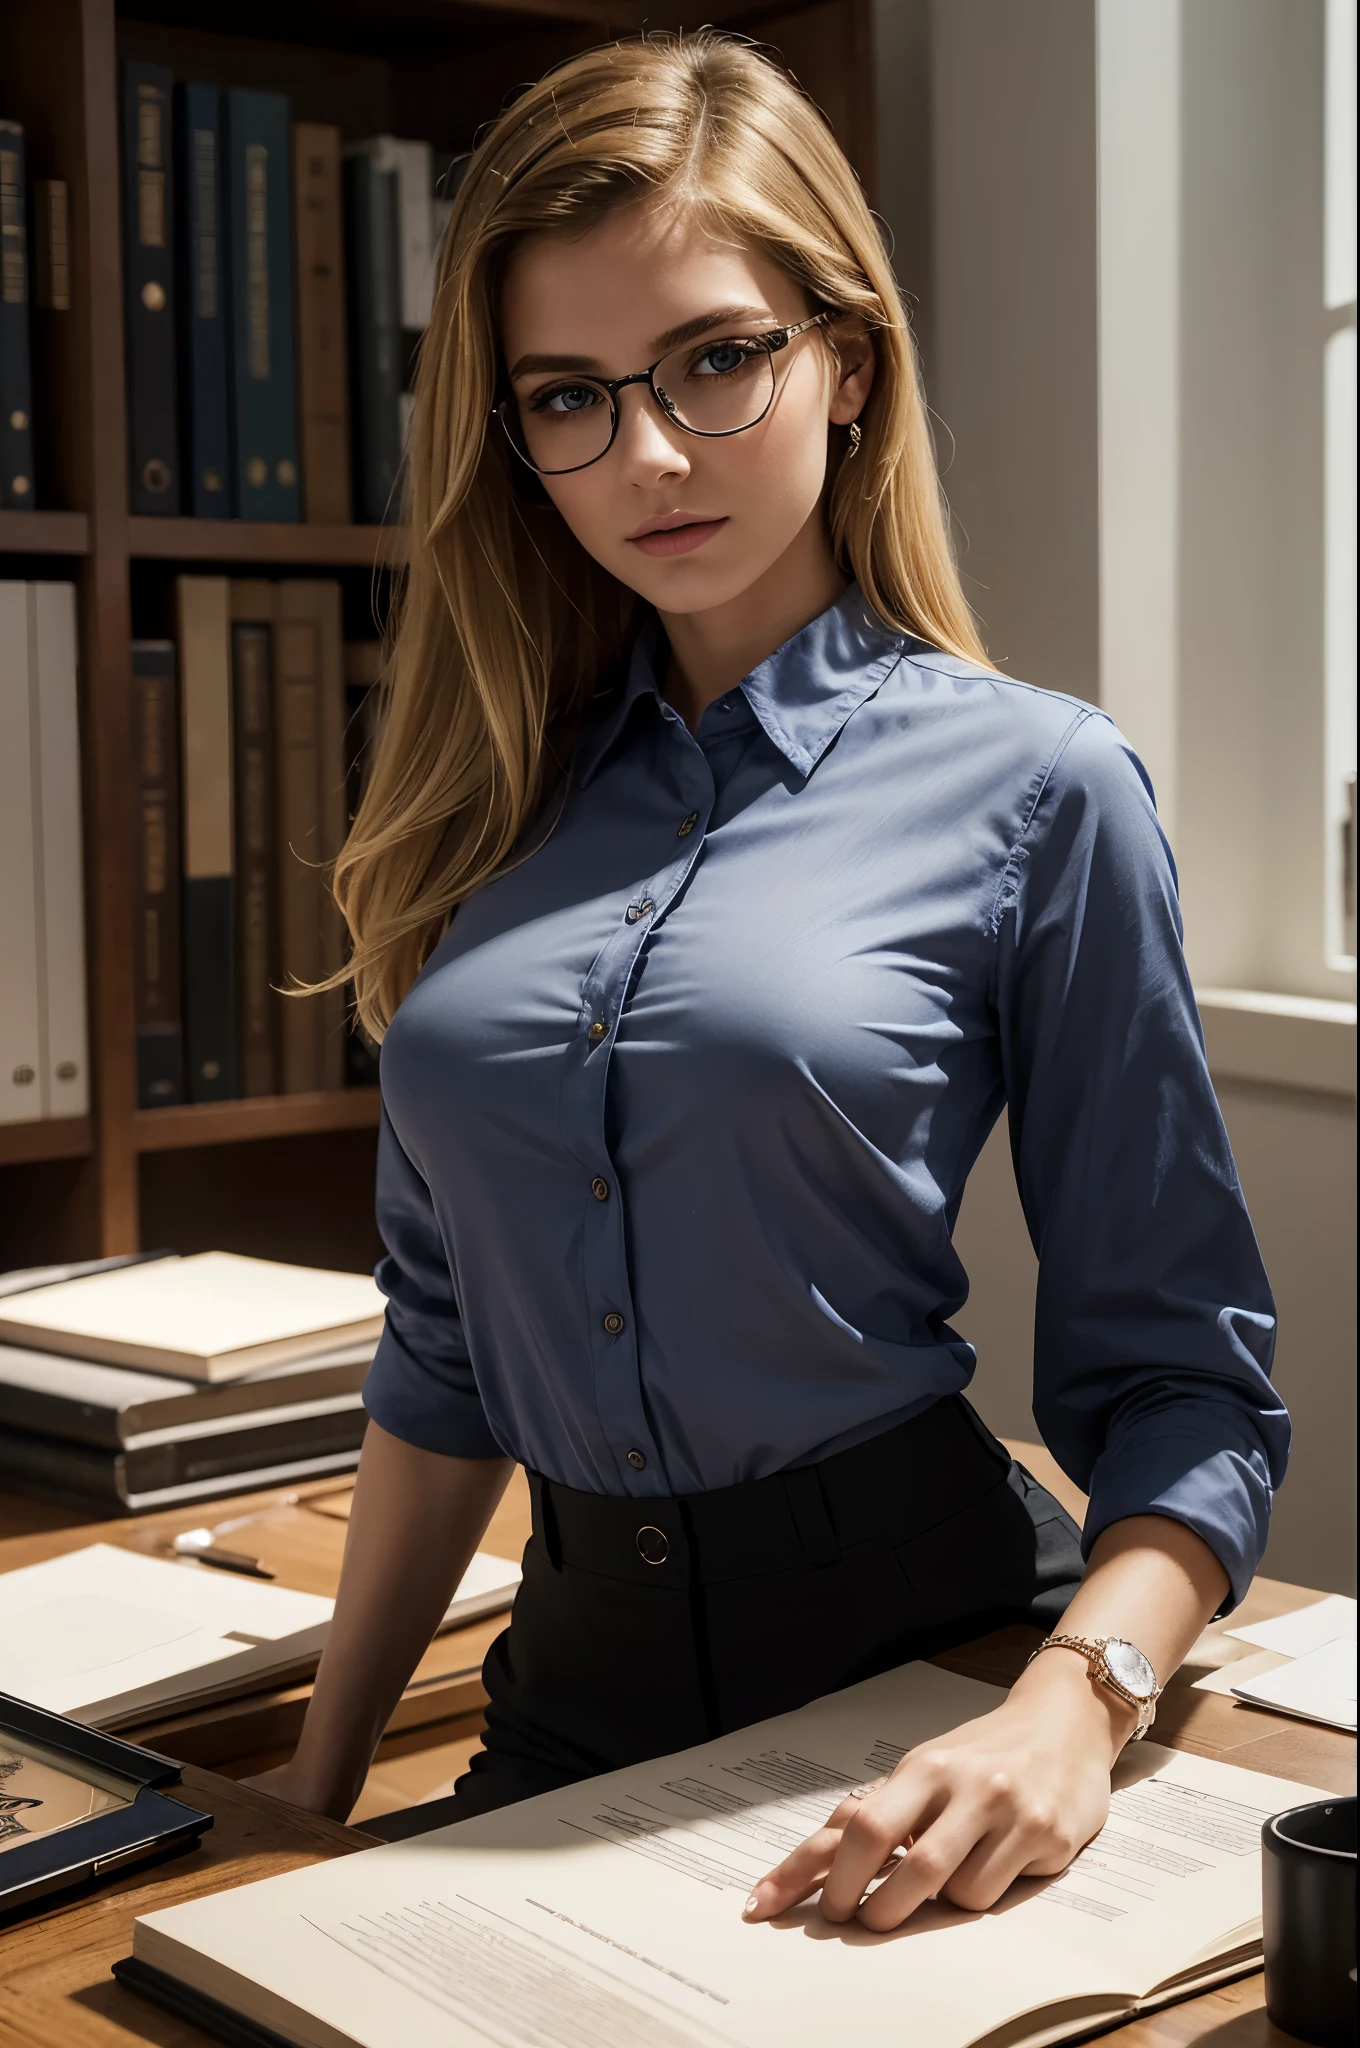 masterpiece, best quality, extremely detailed, hyperrealistic, photorealistic, a beautiful 20s french model, at office:1.2, navy long sleeve shirt:1.2, working at desk, raging:1.1, ultra detailed face, medium hair, blonde hair, pale skin, busty breasts, glasses
